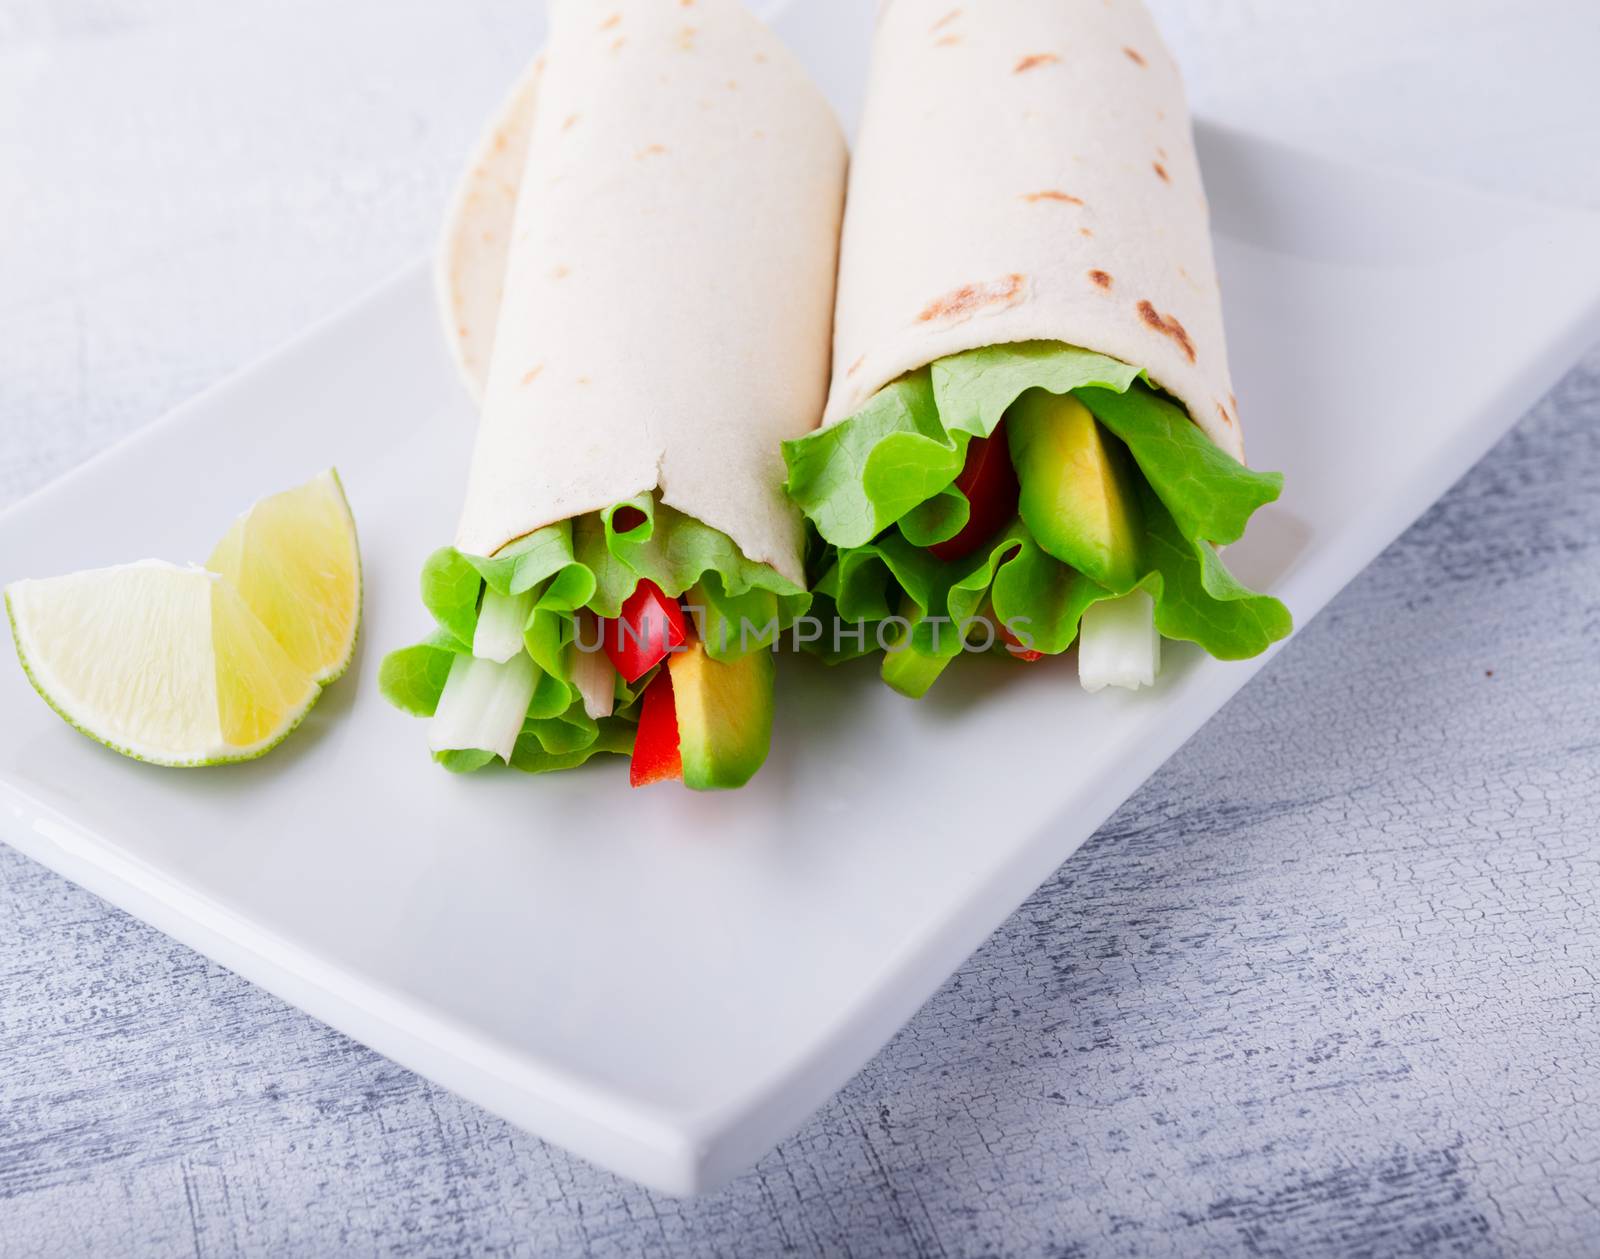 Vegetable wrap sandwiches by supercat67